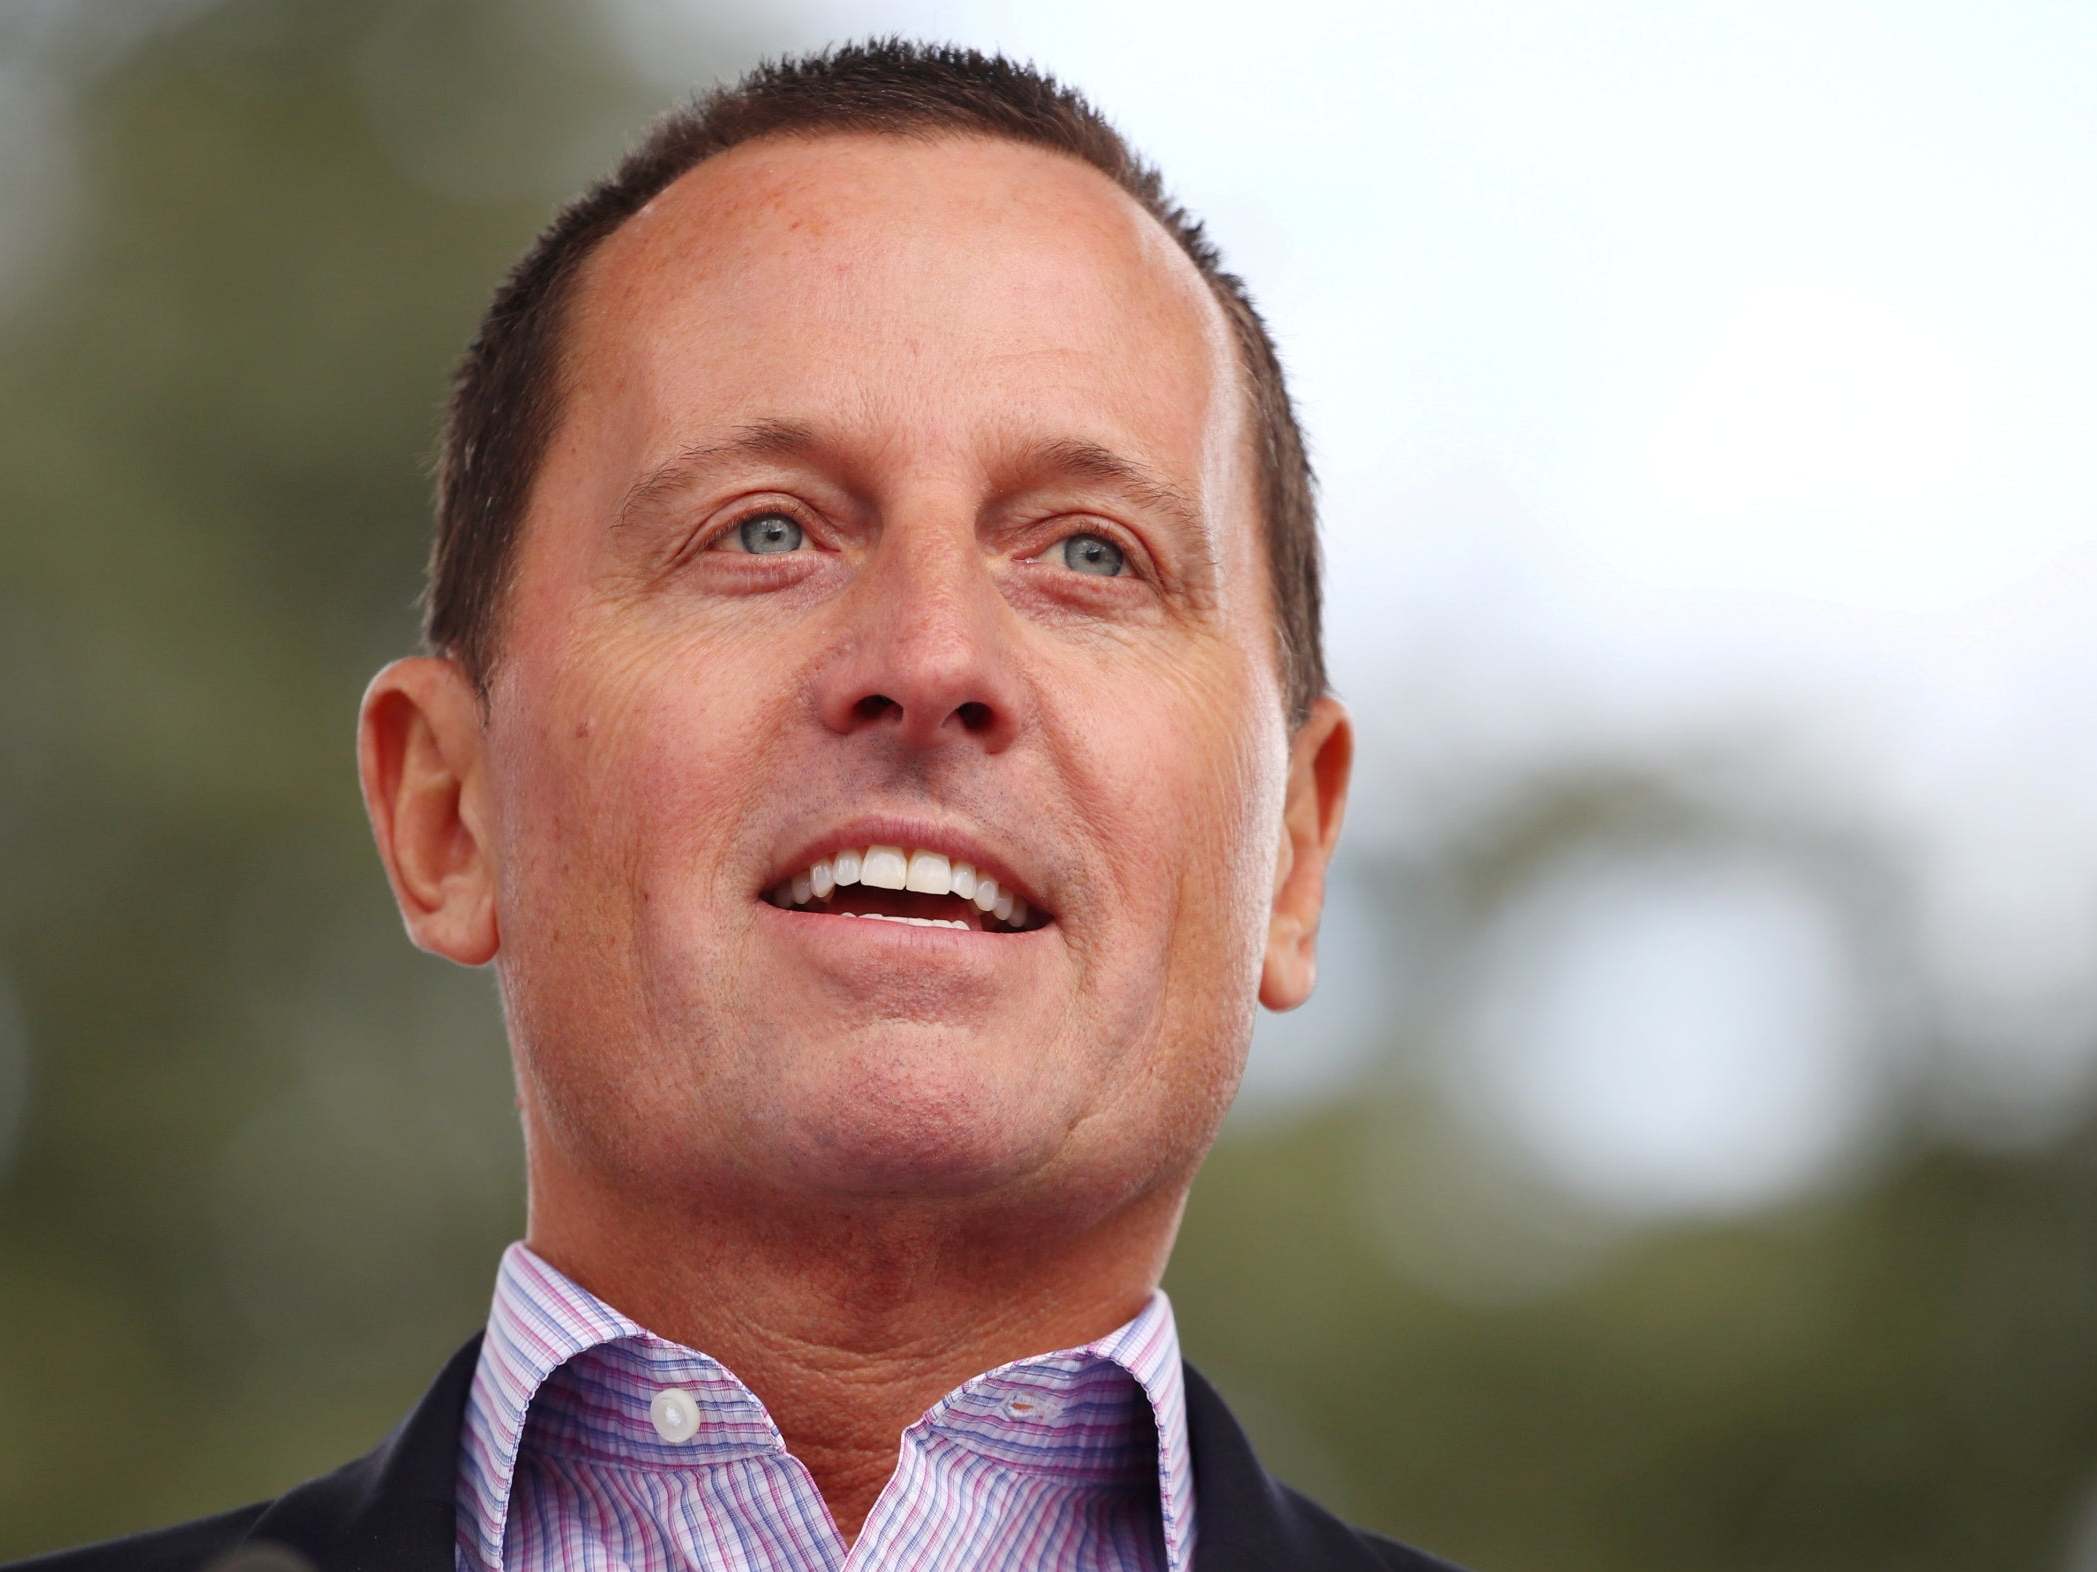 Richard Grenell, US ambassador to Germany, attends the "Rally for Equal Rights at the United Nations (Protesting Anti-Israeli Bias)" in Geneva (Denis Balibouse/Reuters)